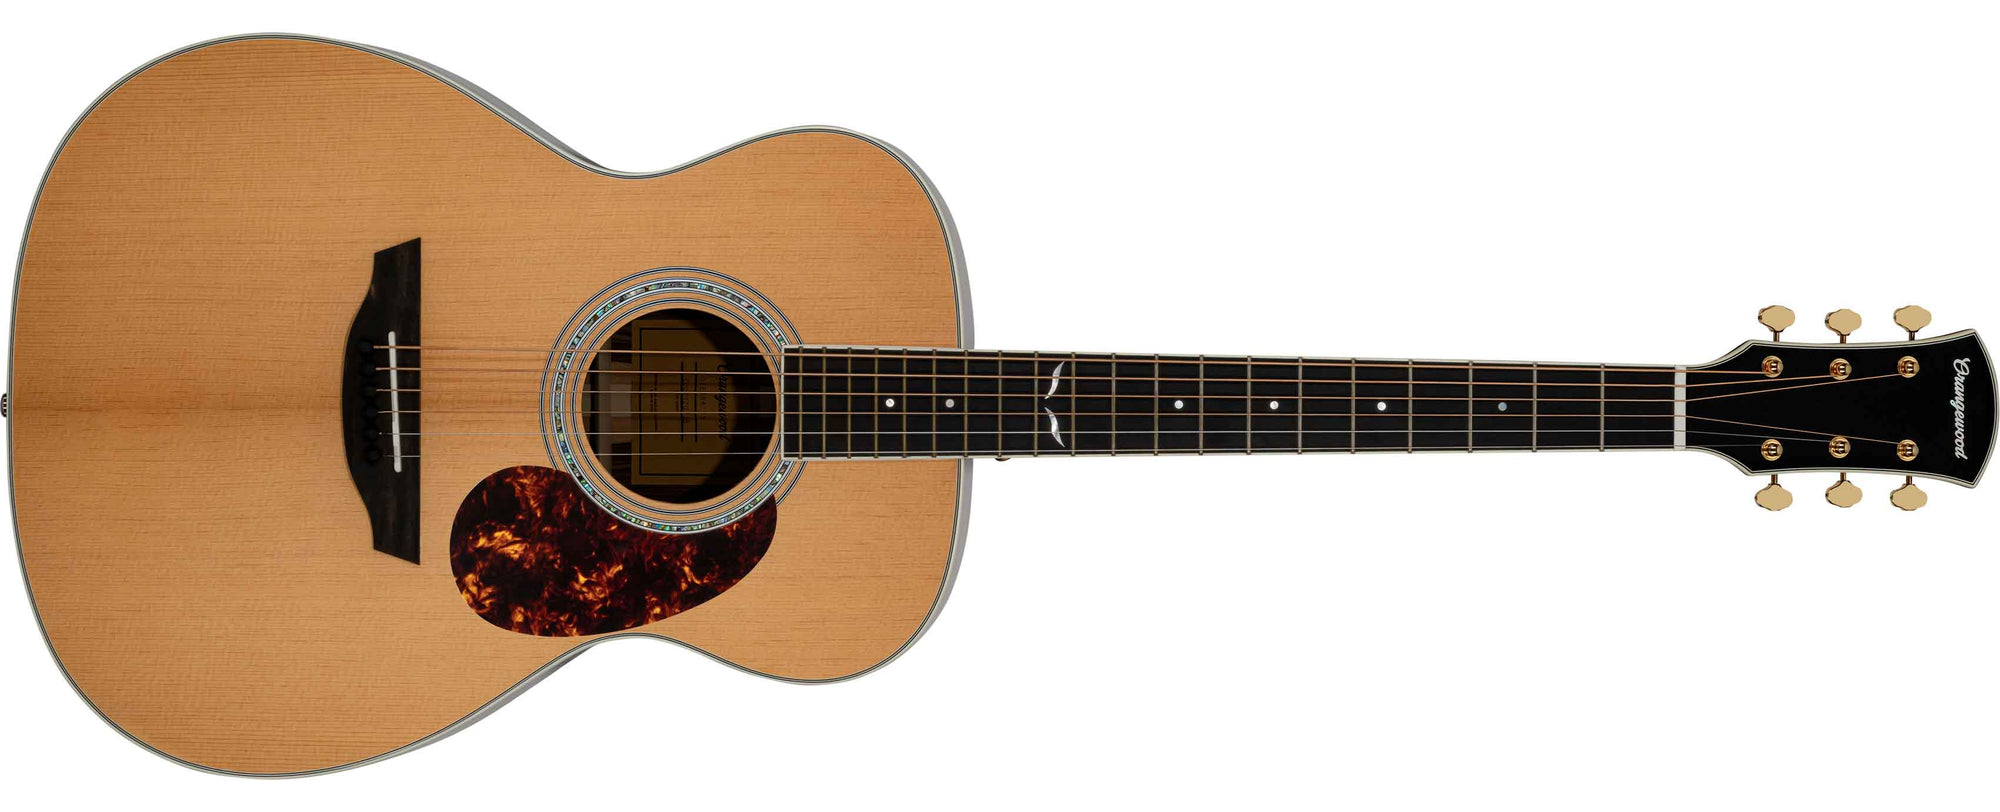 Torrefied spruce grand concert acoustic guitar with an ebony fretboard, mother of pearl inlays, and gold hardware